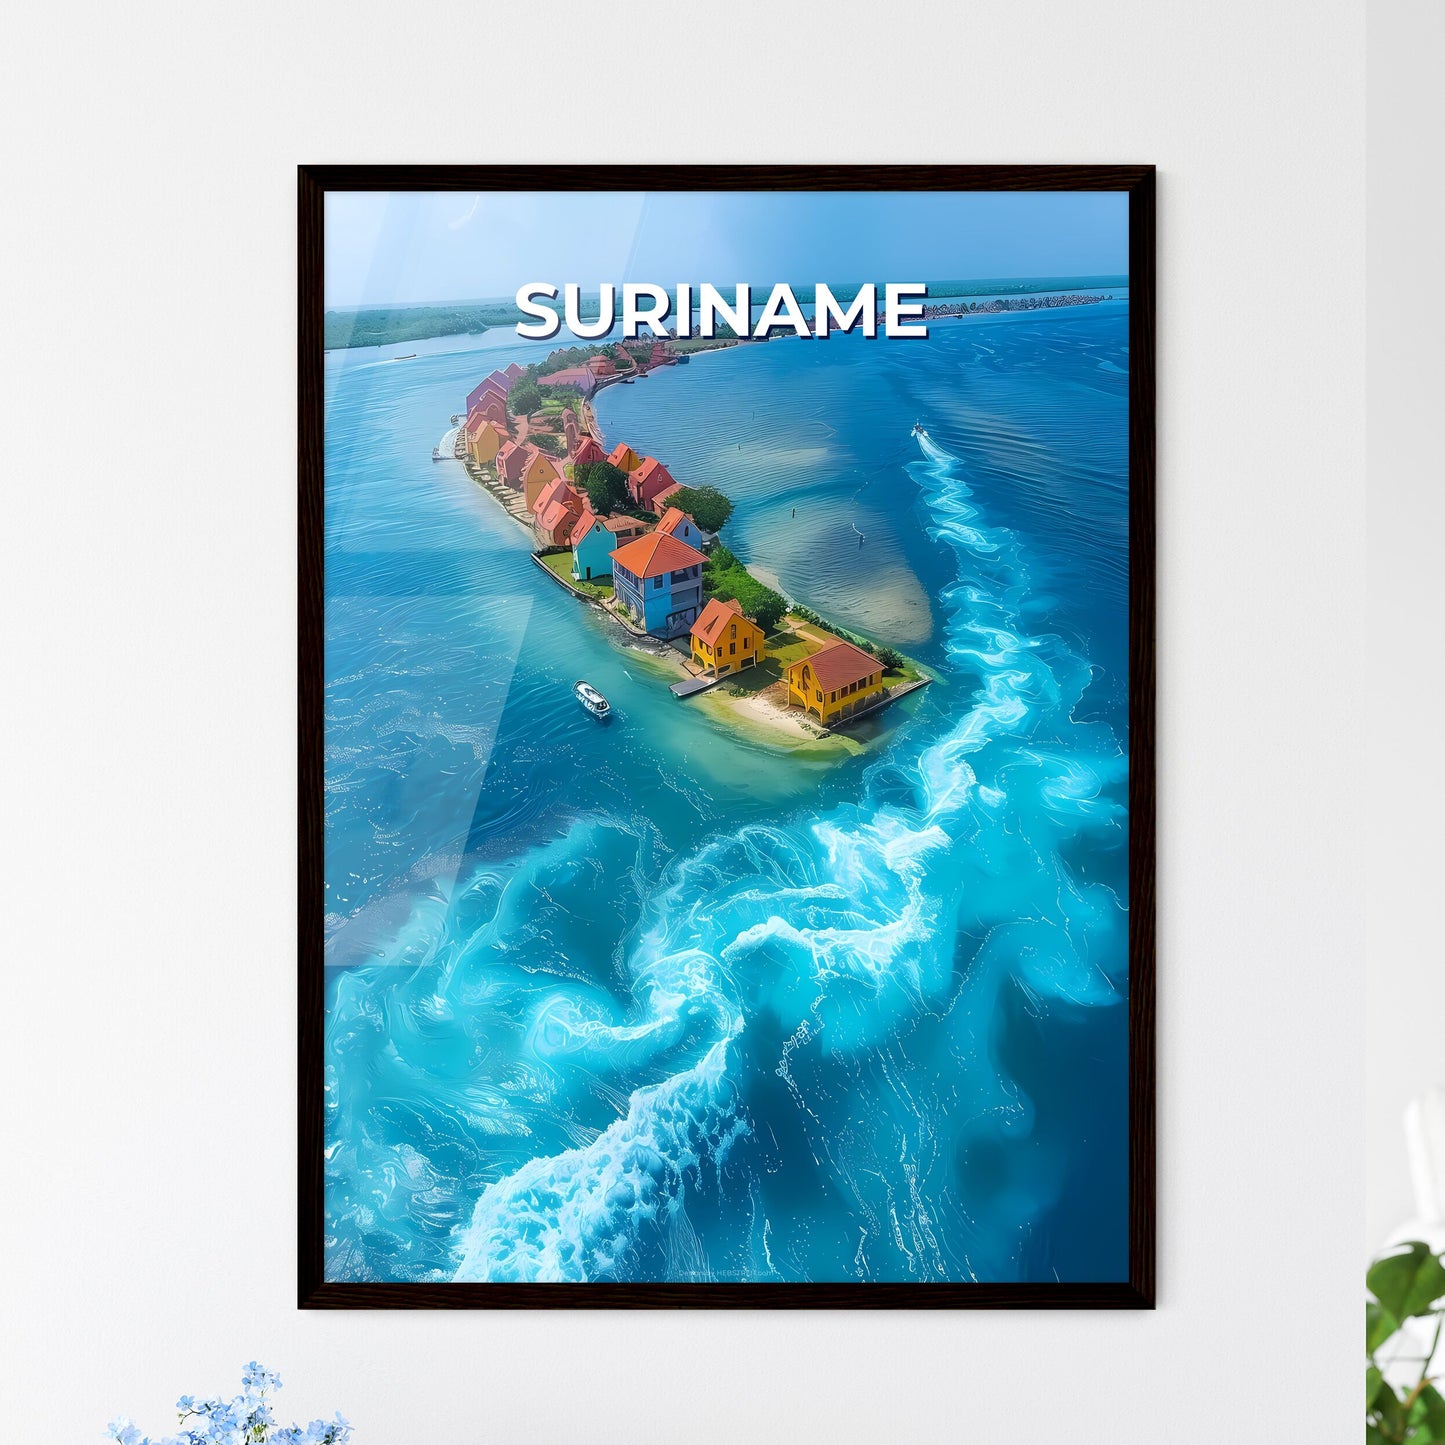 Suriname, South America - Artistic Painting Depicting a Picturesque Island with Colorful Houses and a Boat on Tranquil Waters